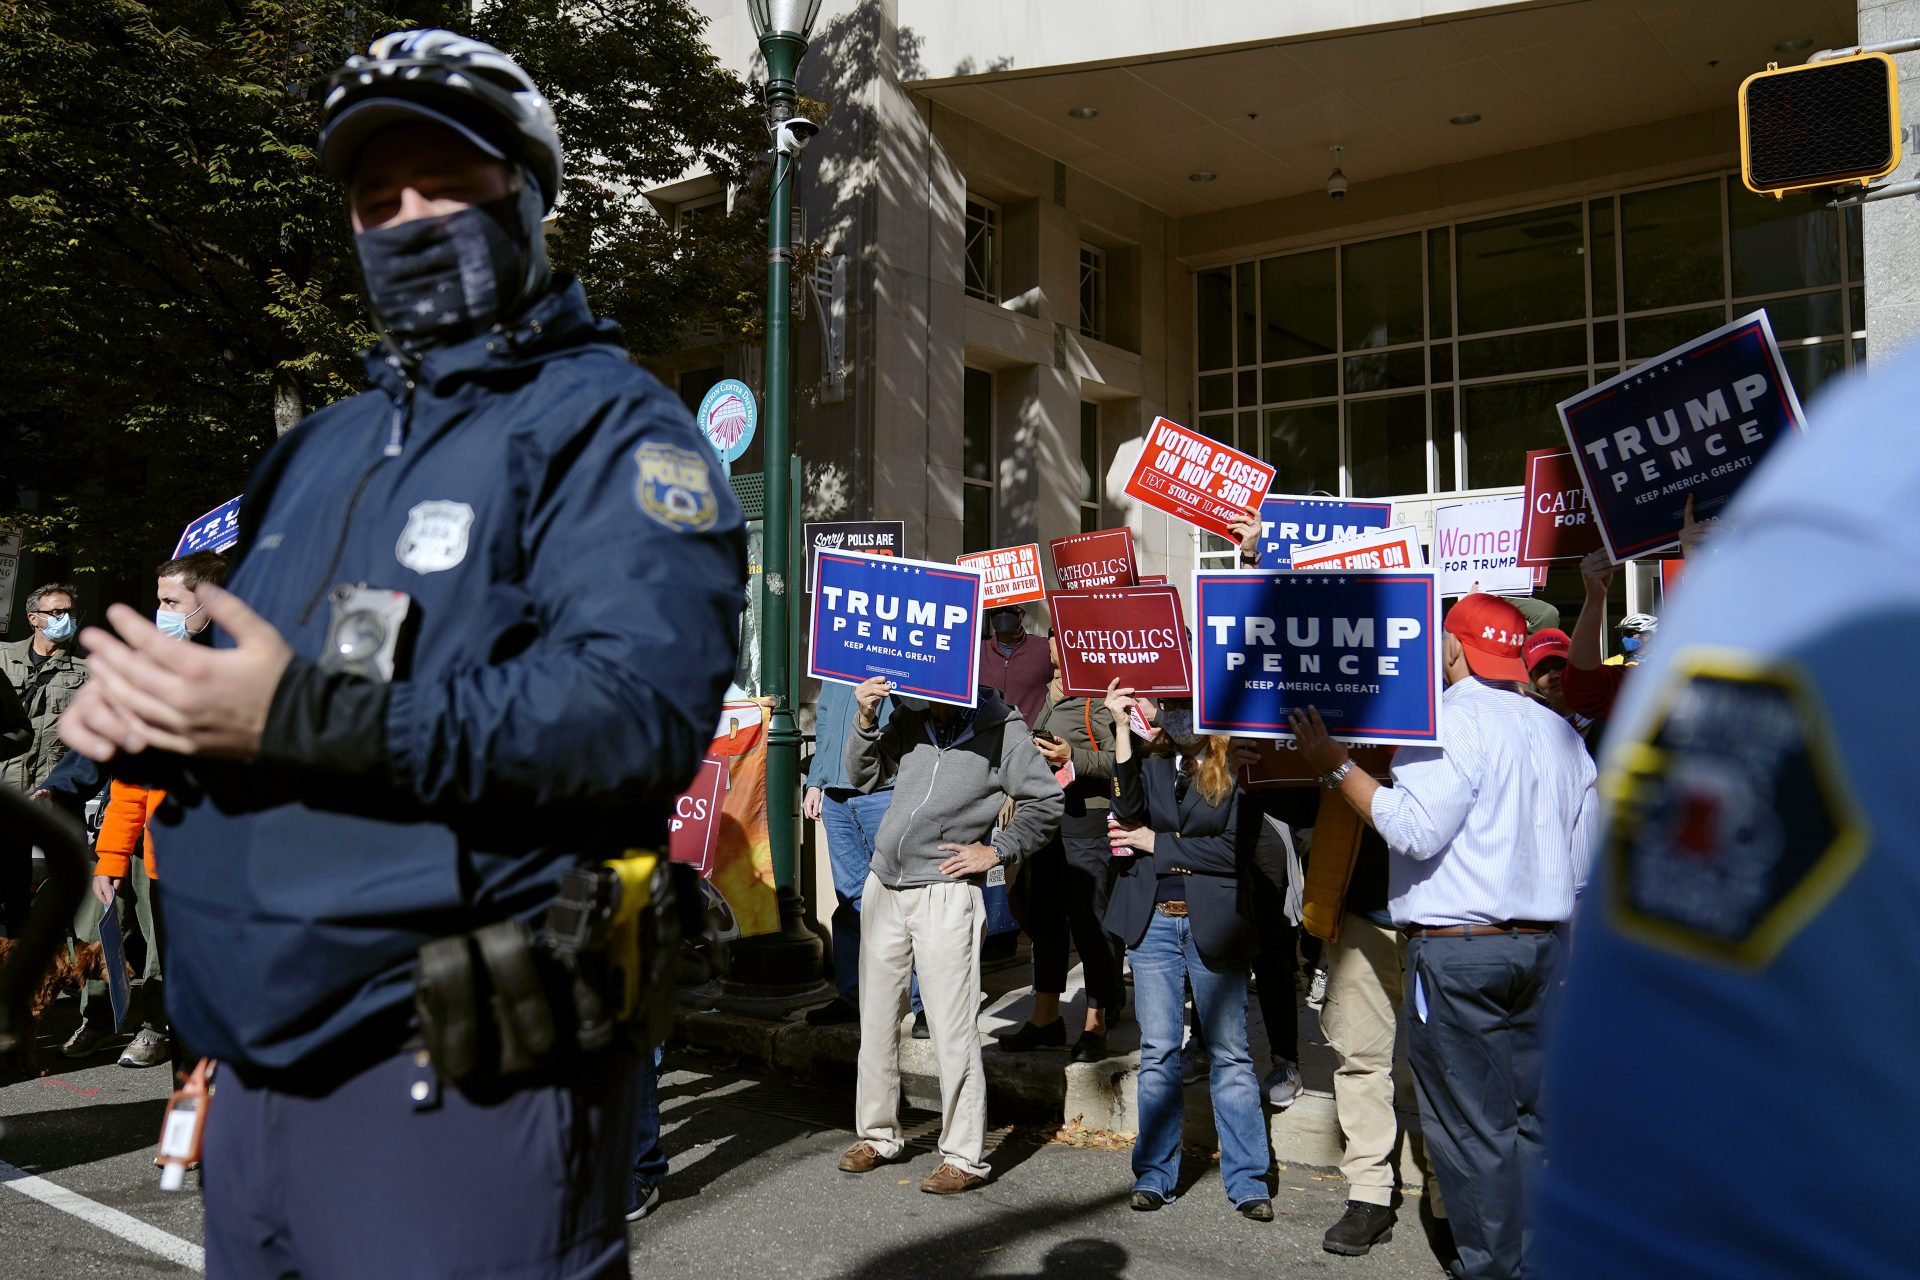 Police officers stand watch as protesters demonstrate outside the Pennsylvania Convention Center where votes are being counted, Thursday, Nov. 5, 2020, in Philadelphia, following Tuesday's election.